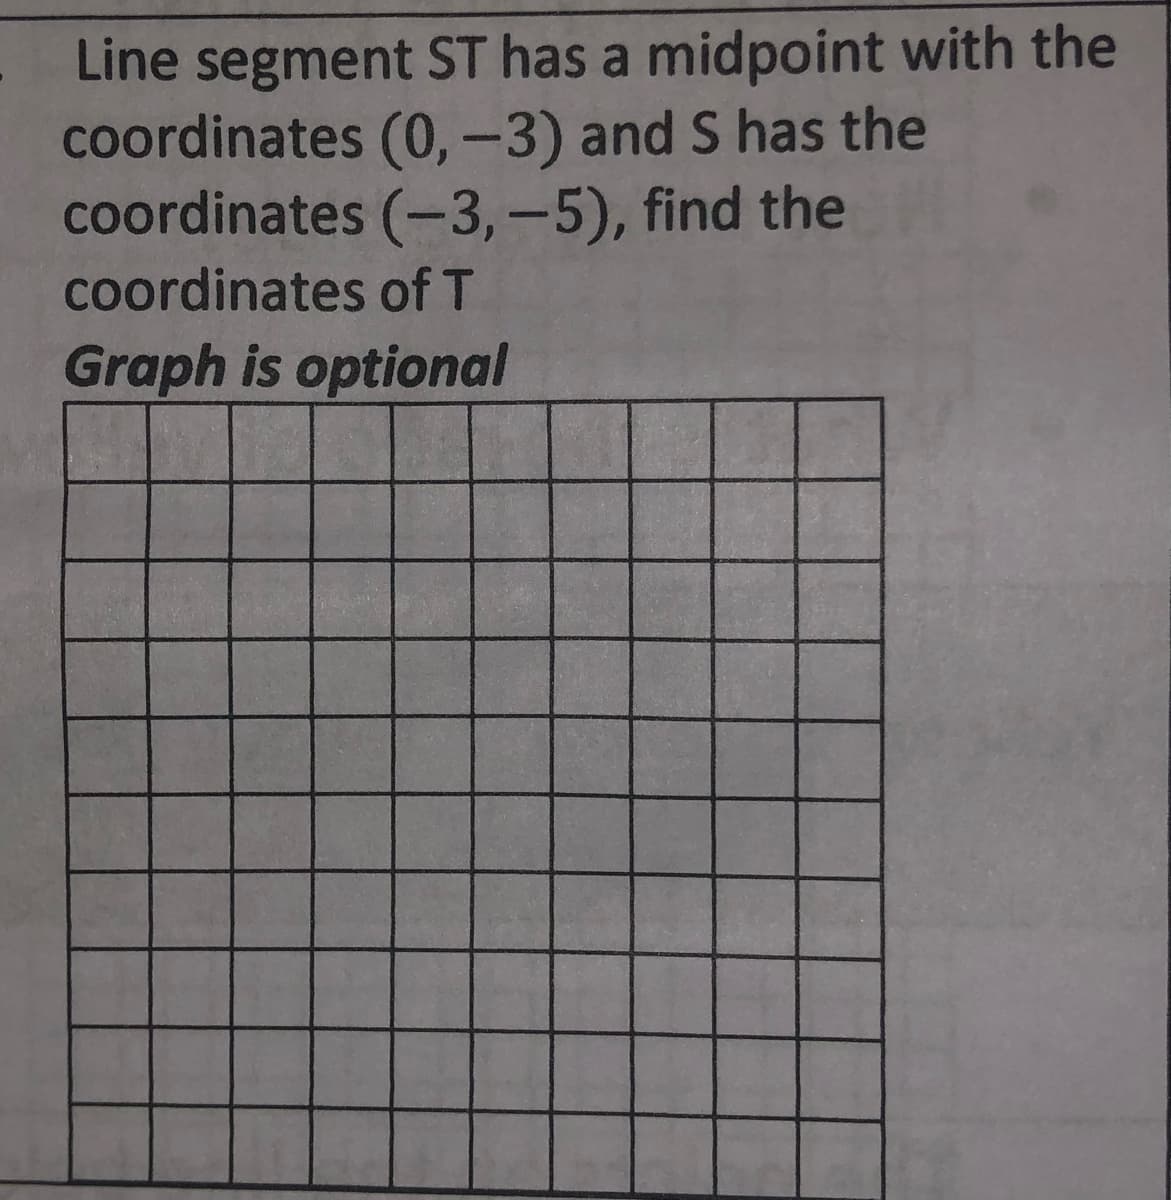 Line segment ST has a midpoint with the
coordinates (0,-3) and S has the
coordinates (-3,-5), find the
coordinates of T
Graph is optional
